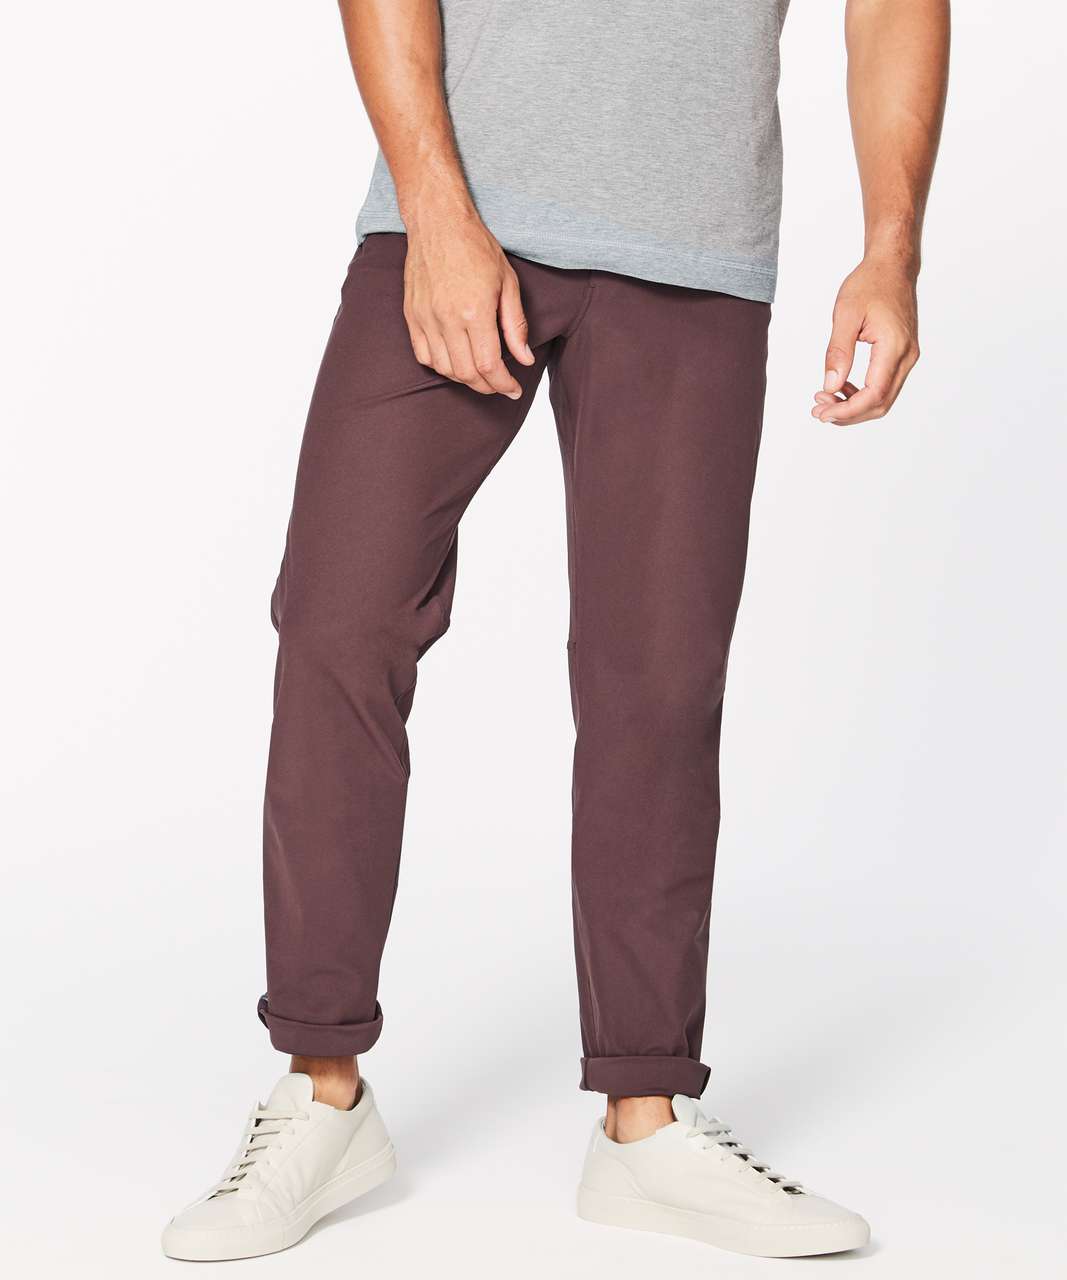 Quince Chino Review - FINALLY, A Cheaper ABC Pant Dupe?!